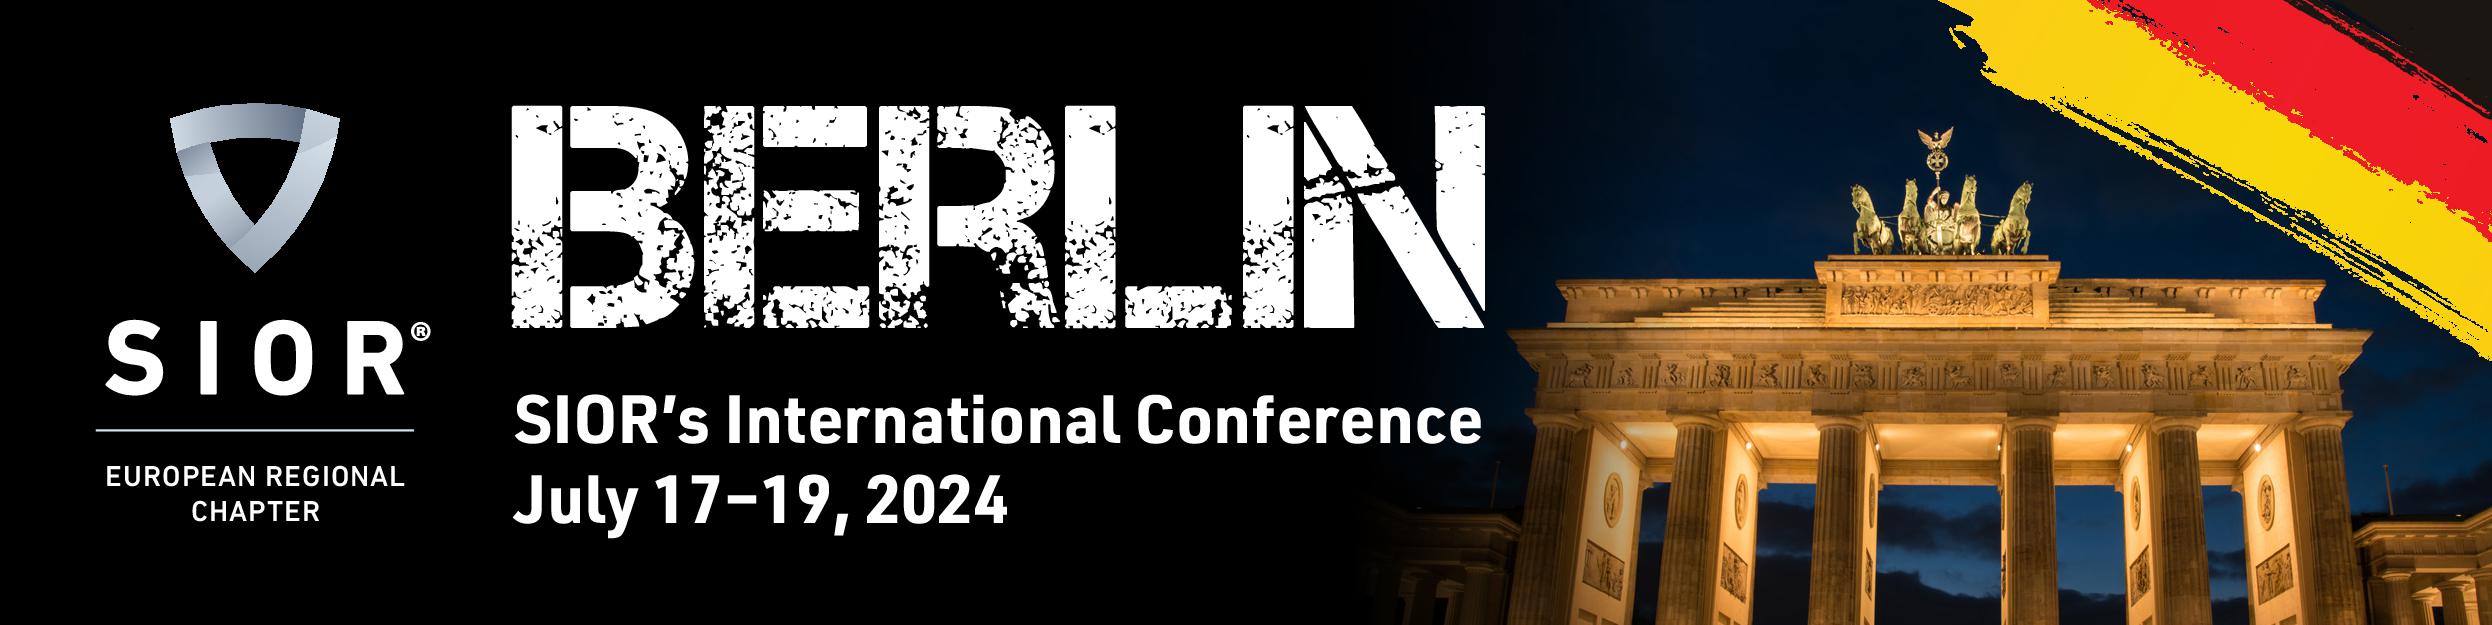 4th SIOR International Conference, Berlin. Sior Europe